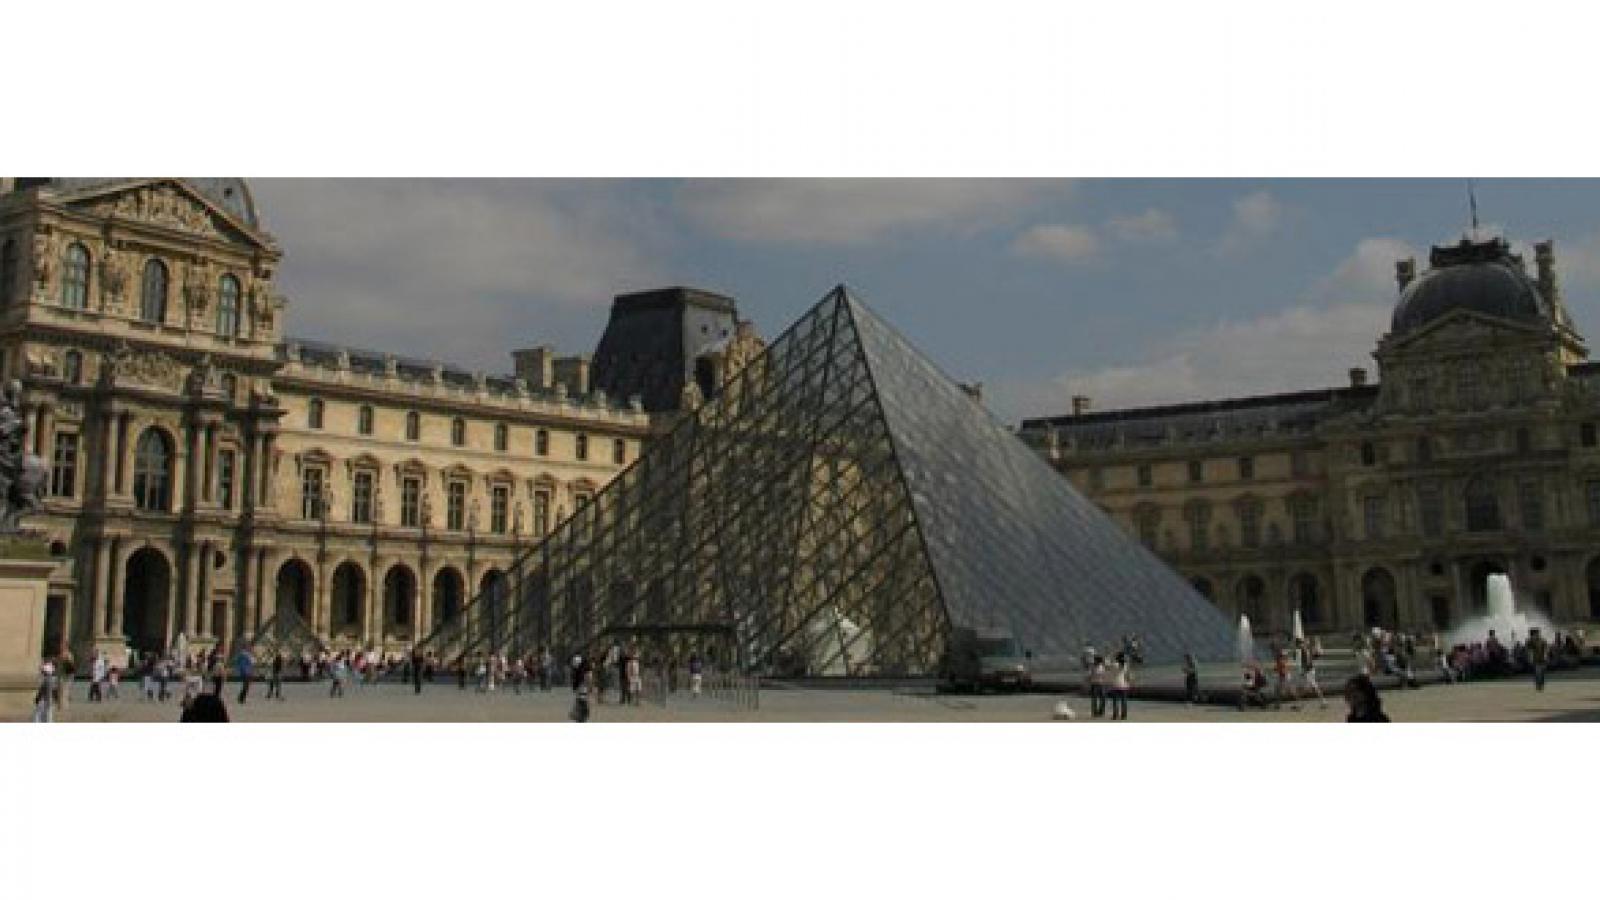 The glass pyramid outside the Louvre art museum in Paris.